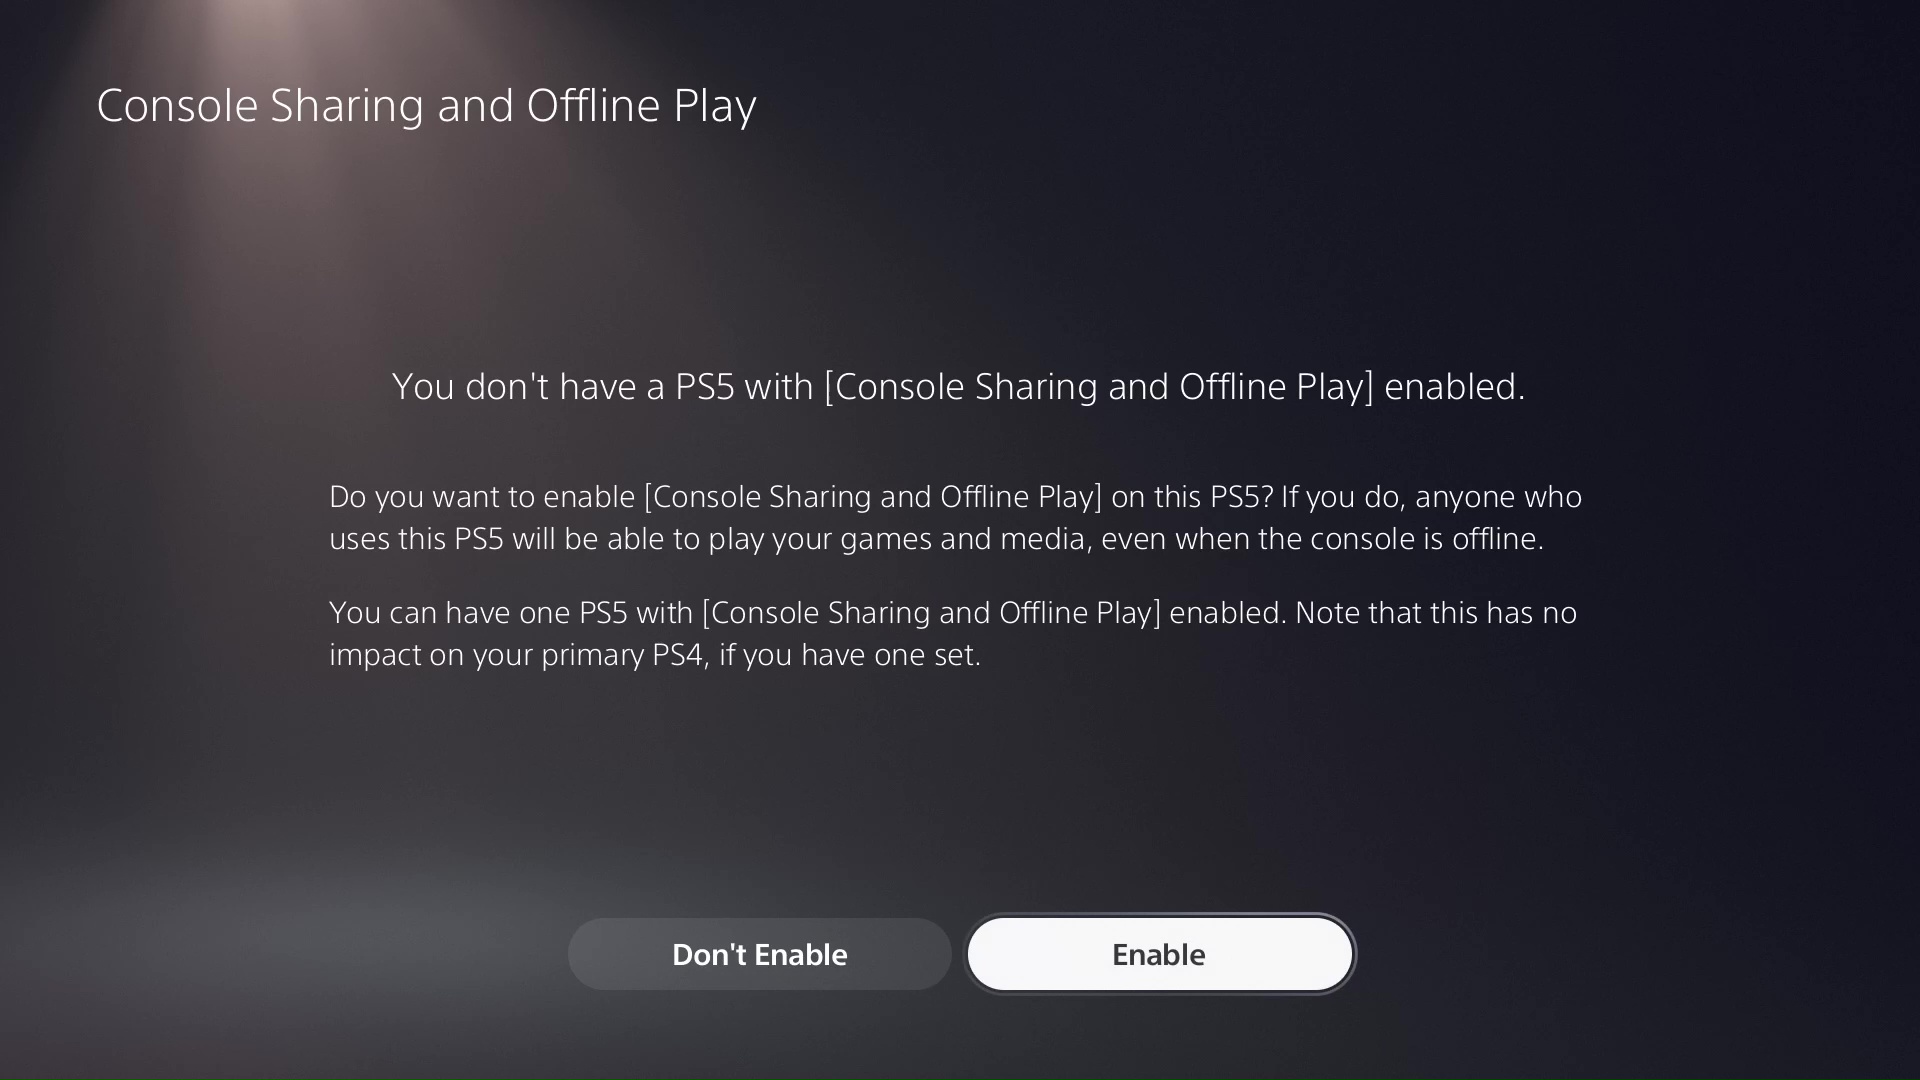 PS5 troubleshooting - Console Sharing and Offline Play